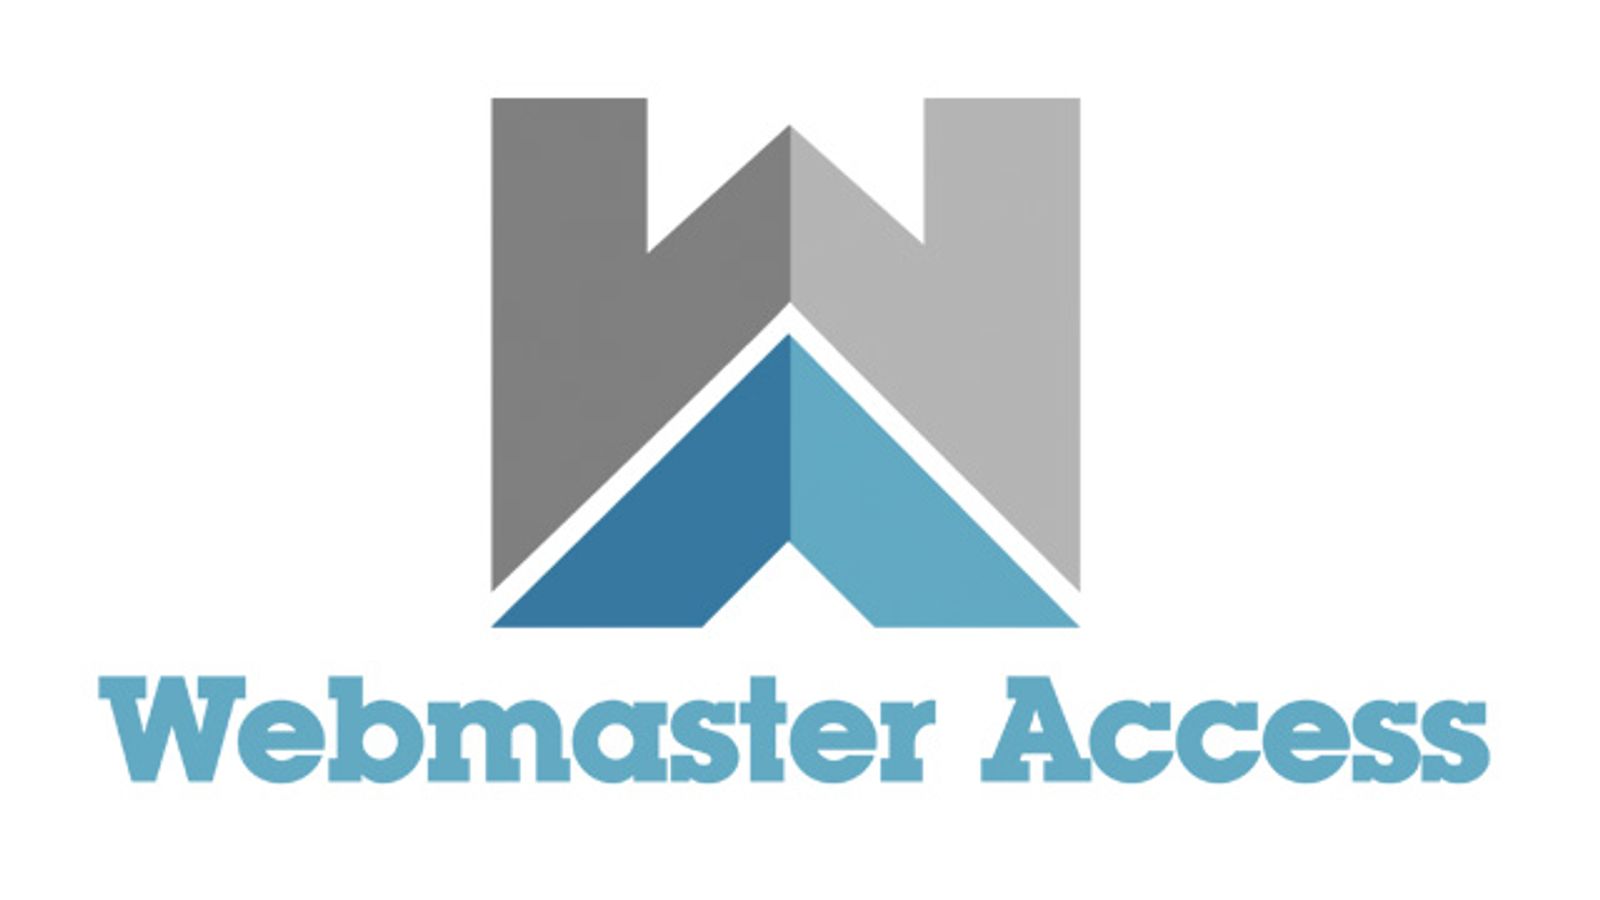 Webmaster Access Dates Announced For Sept. 20-23